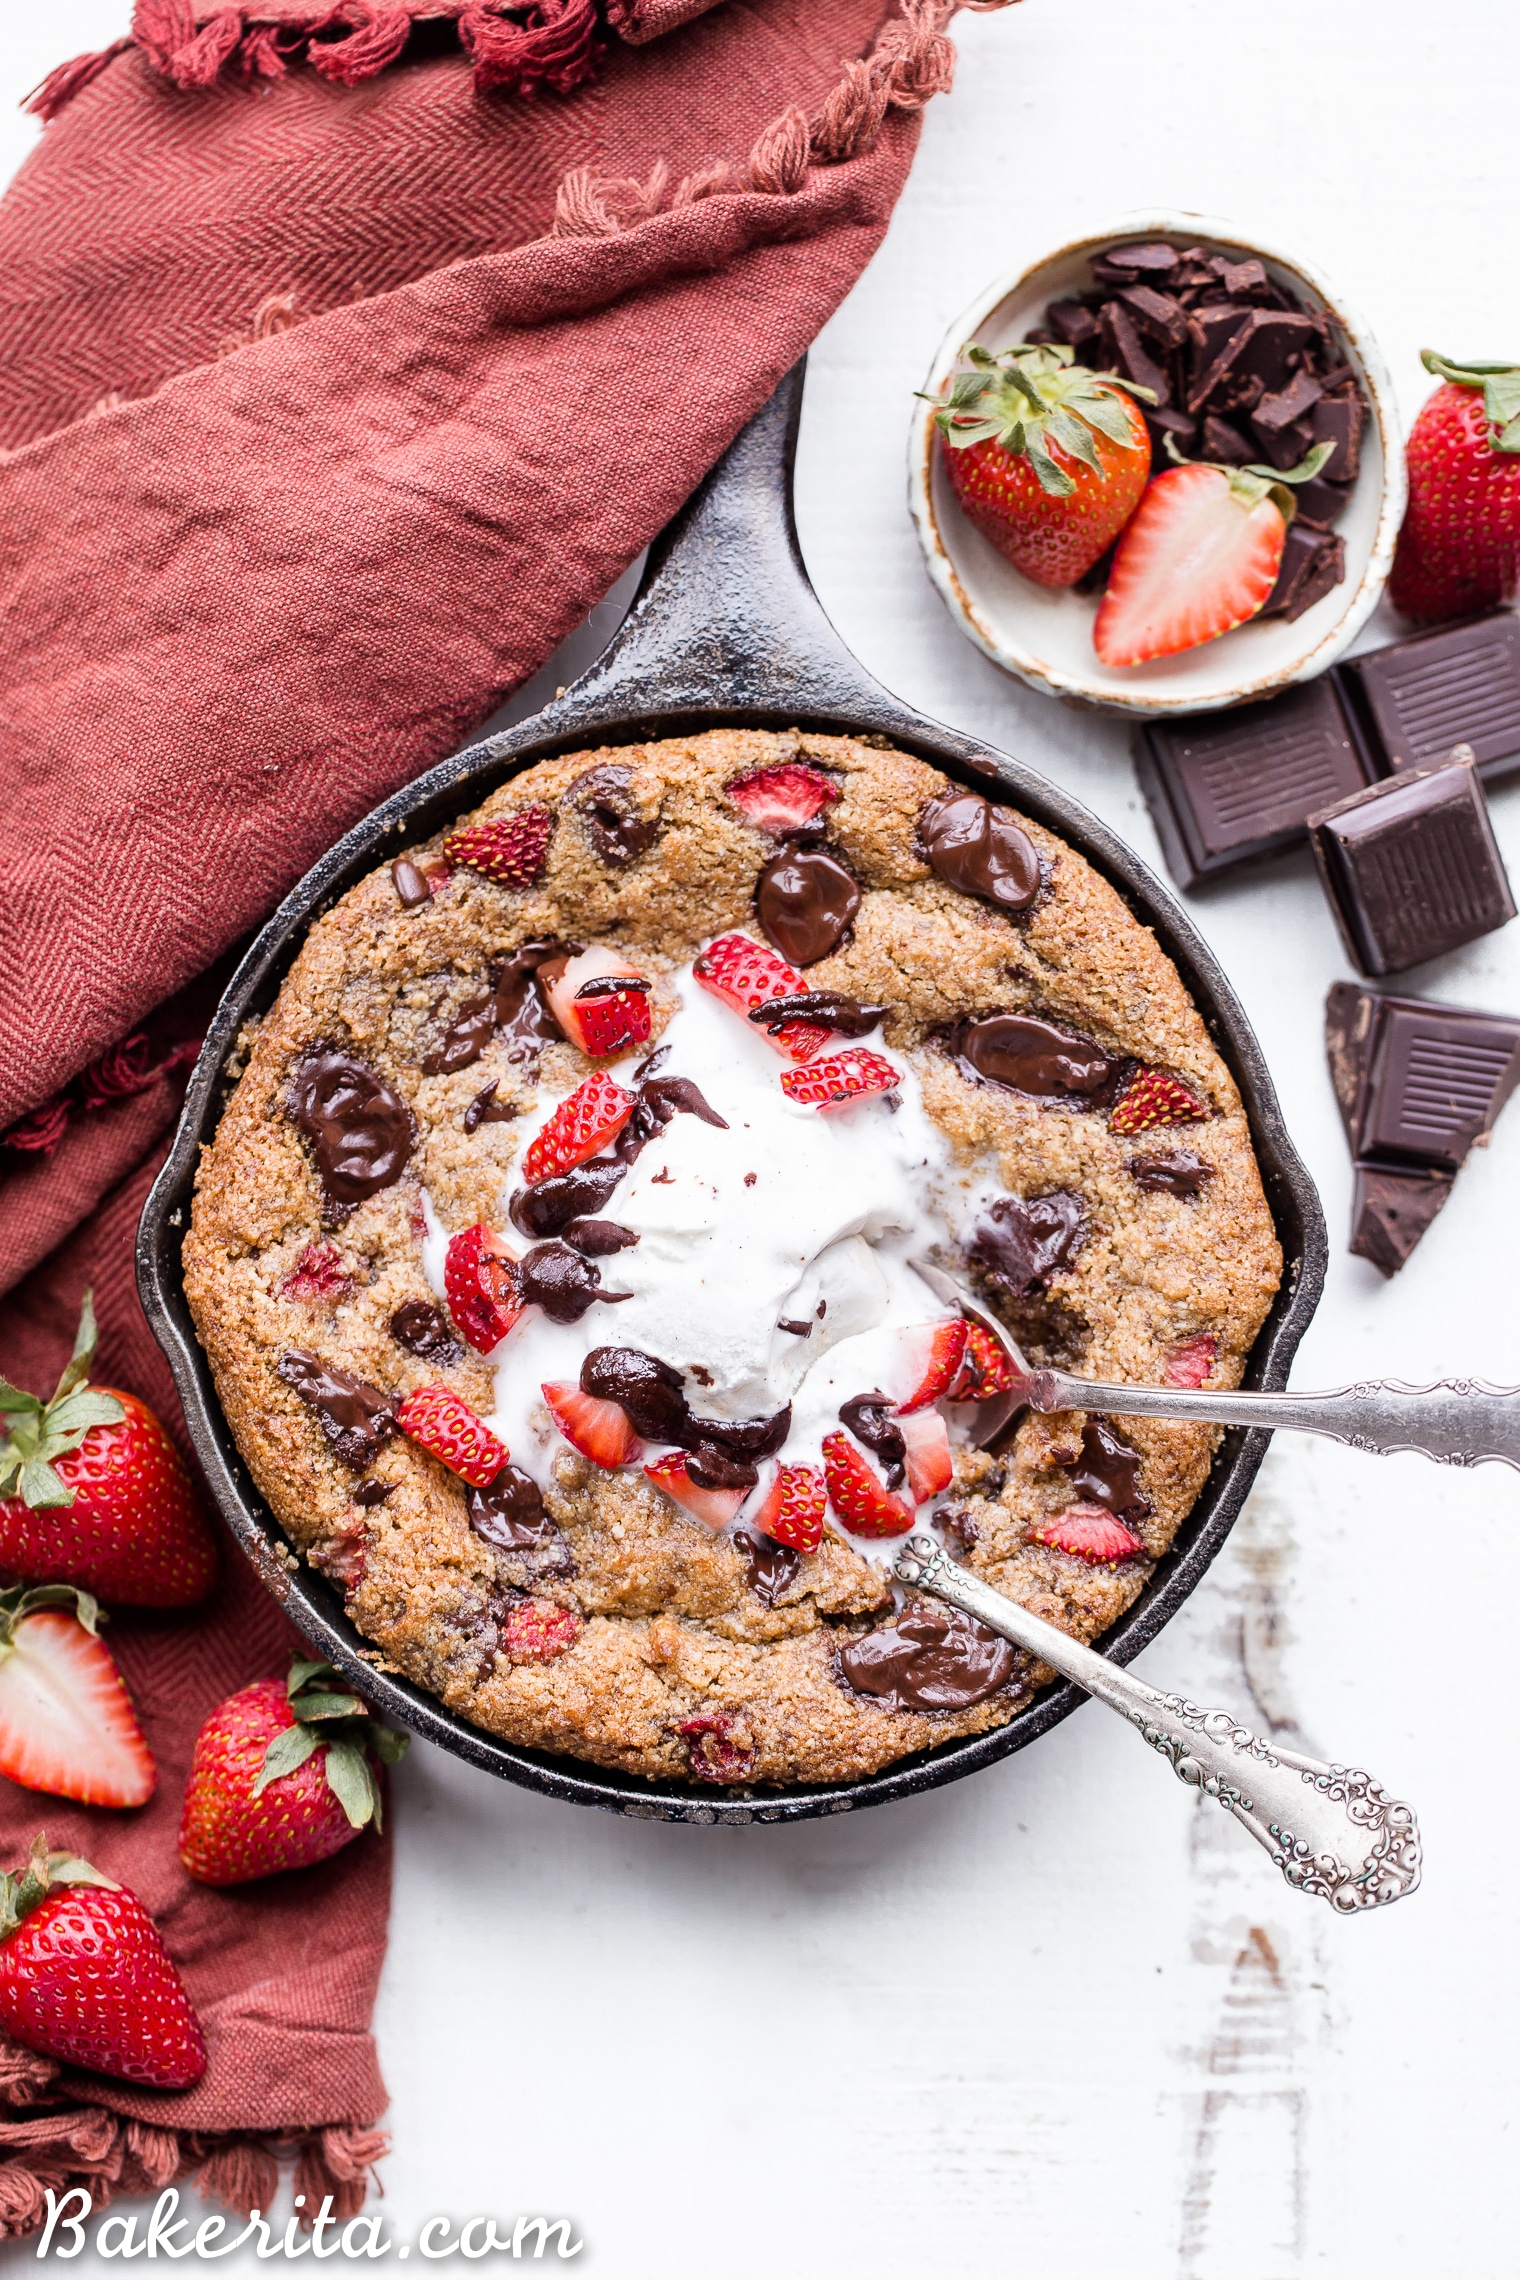 This Strawberry Chocolate Chunk Skillet Cookie is gooey in the middle, with crispy edges and all the flavors you love in a chocolate covered strawberry! This gluten-free, paleo and vegan skillet cookie will satisfy all your cravings - the fresh strawberries are the perfect fruity addition to this rich, chocolatey treat!